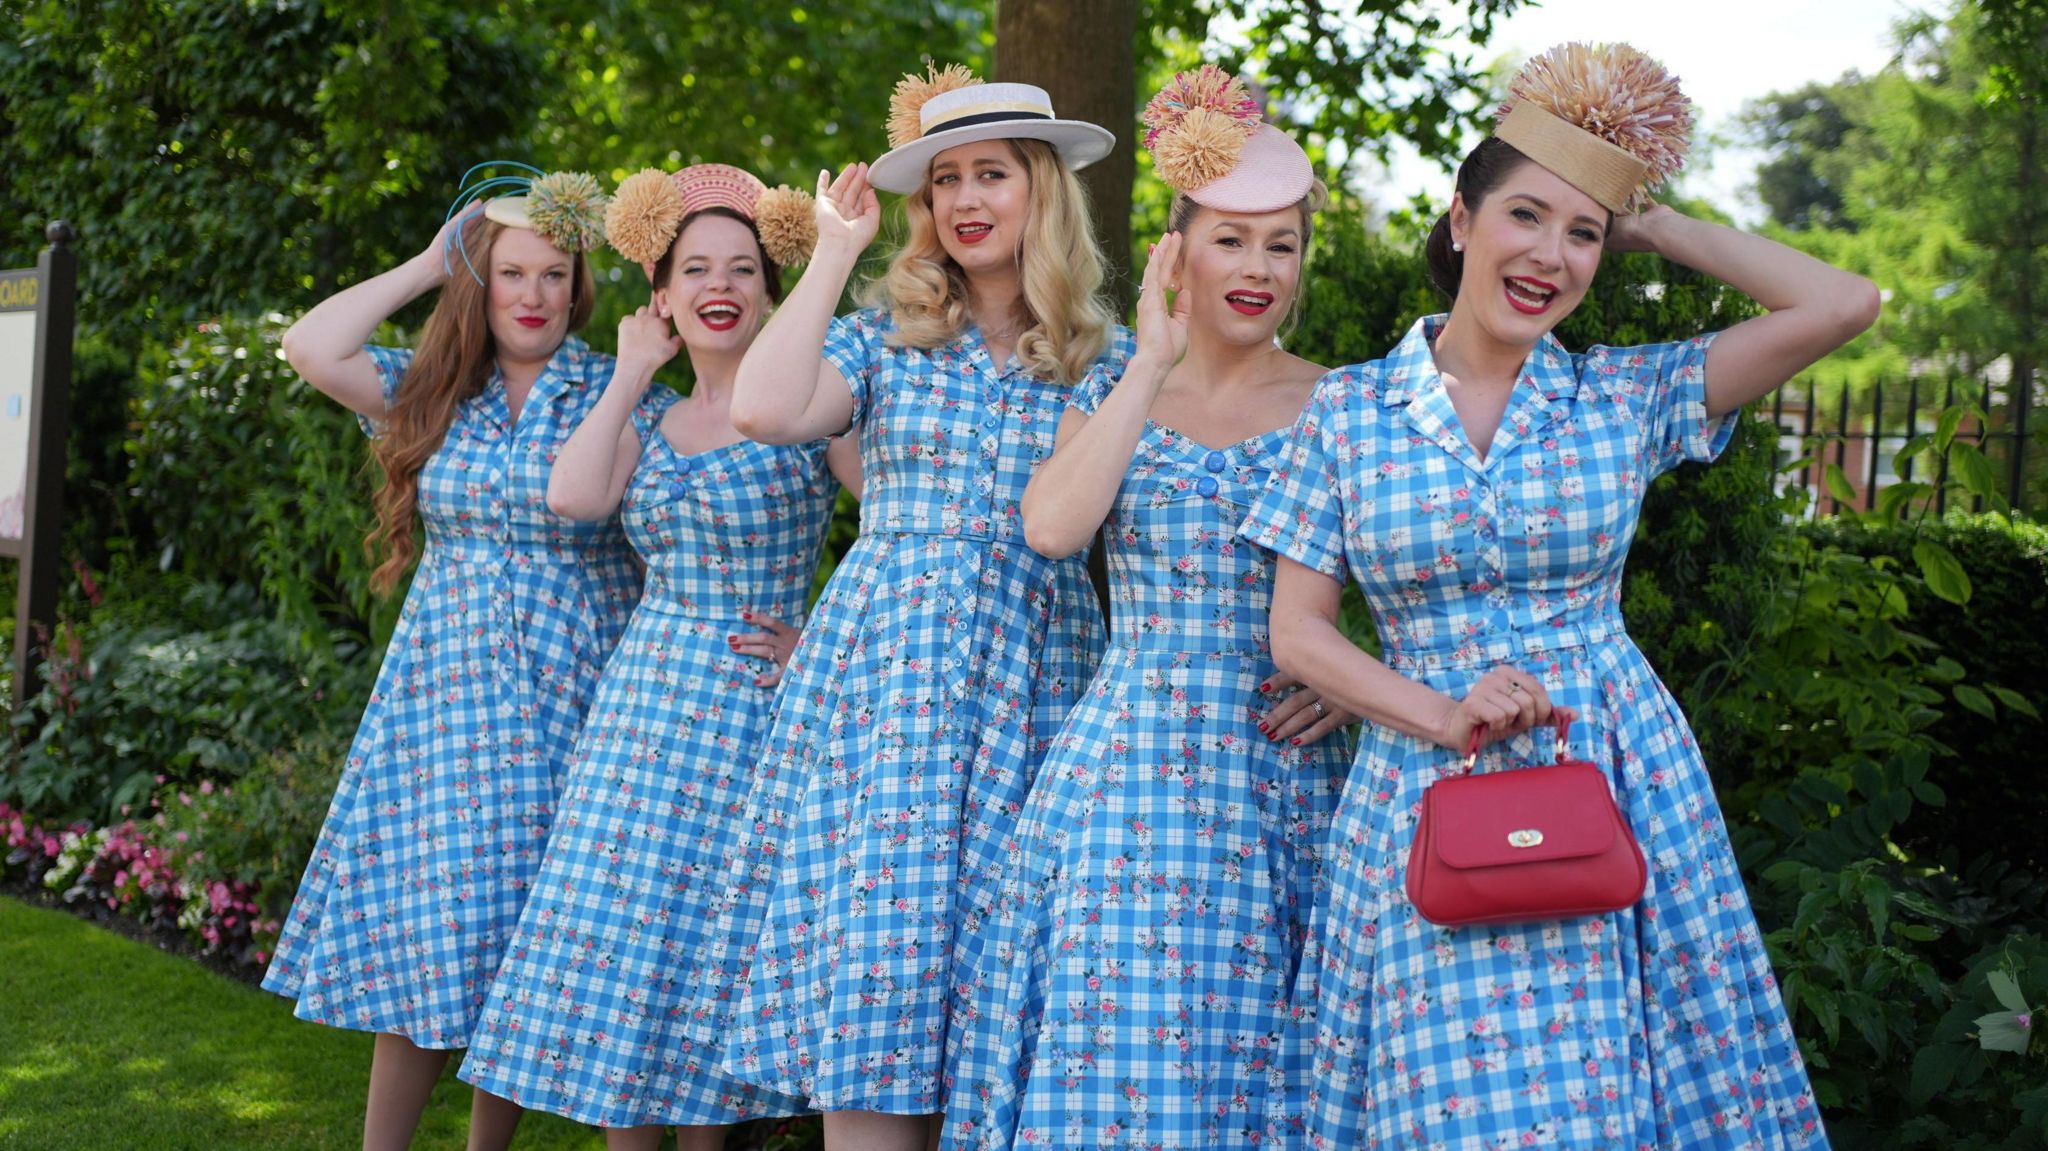 A group of five women line up and pose for the camera wearing matching blue and white gingham check dresses